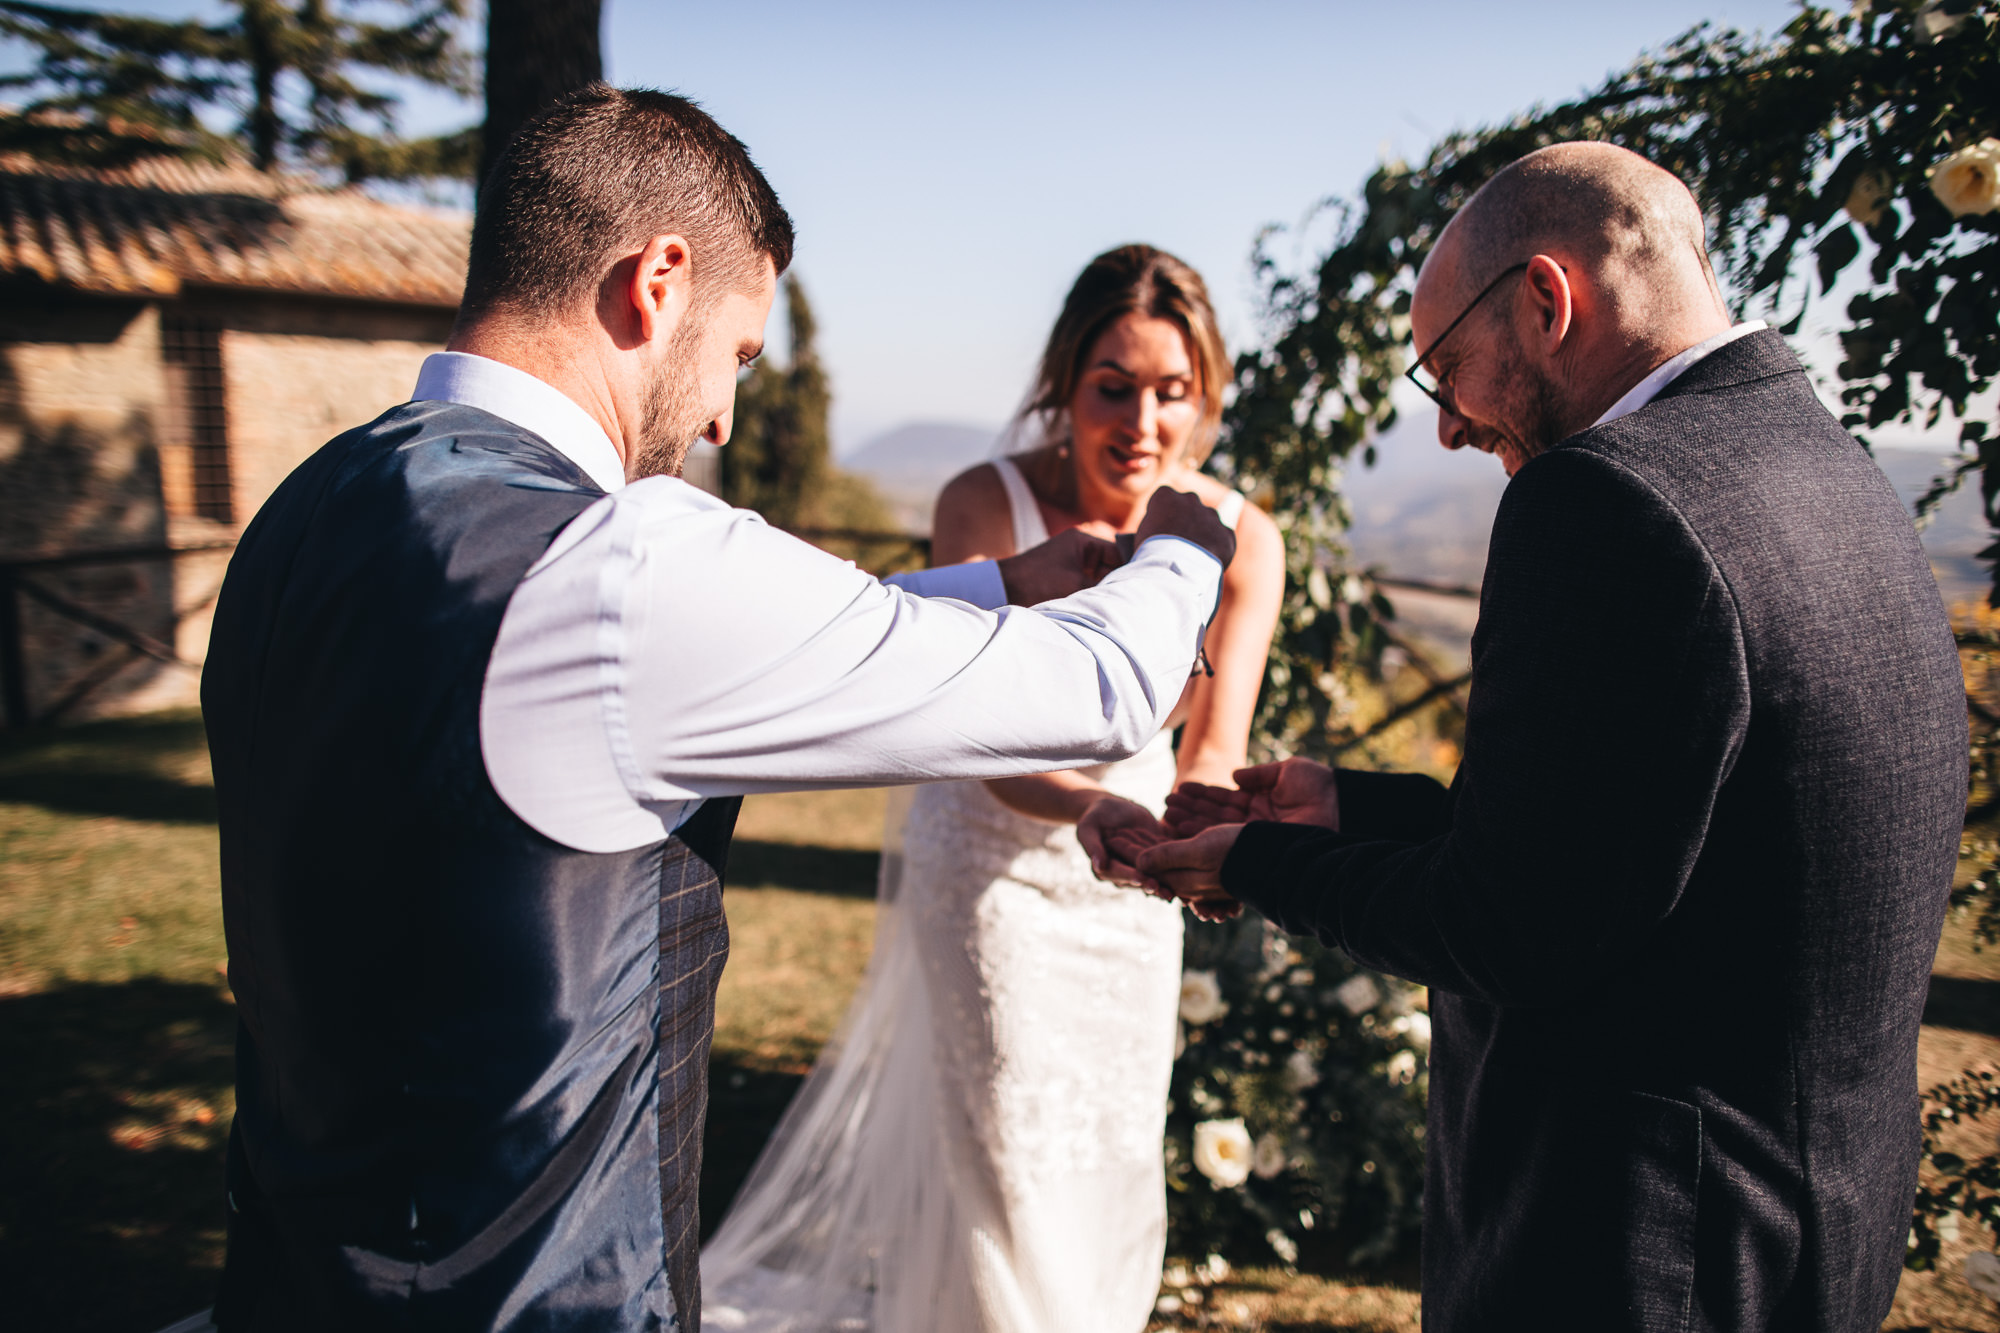 wedding rings are handed to couple during their wedding ceremony